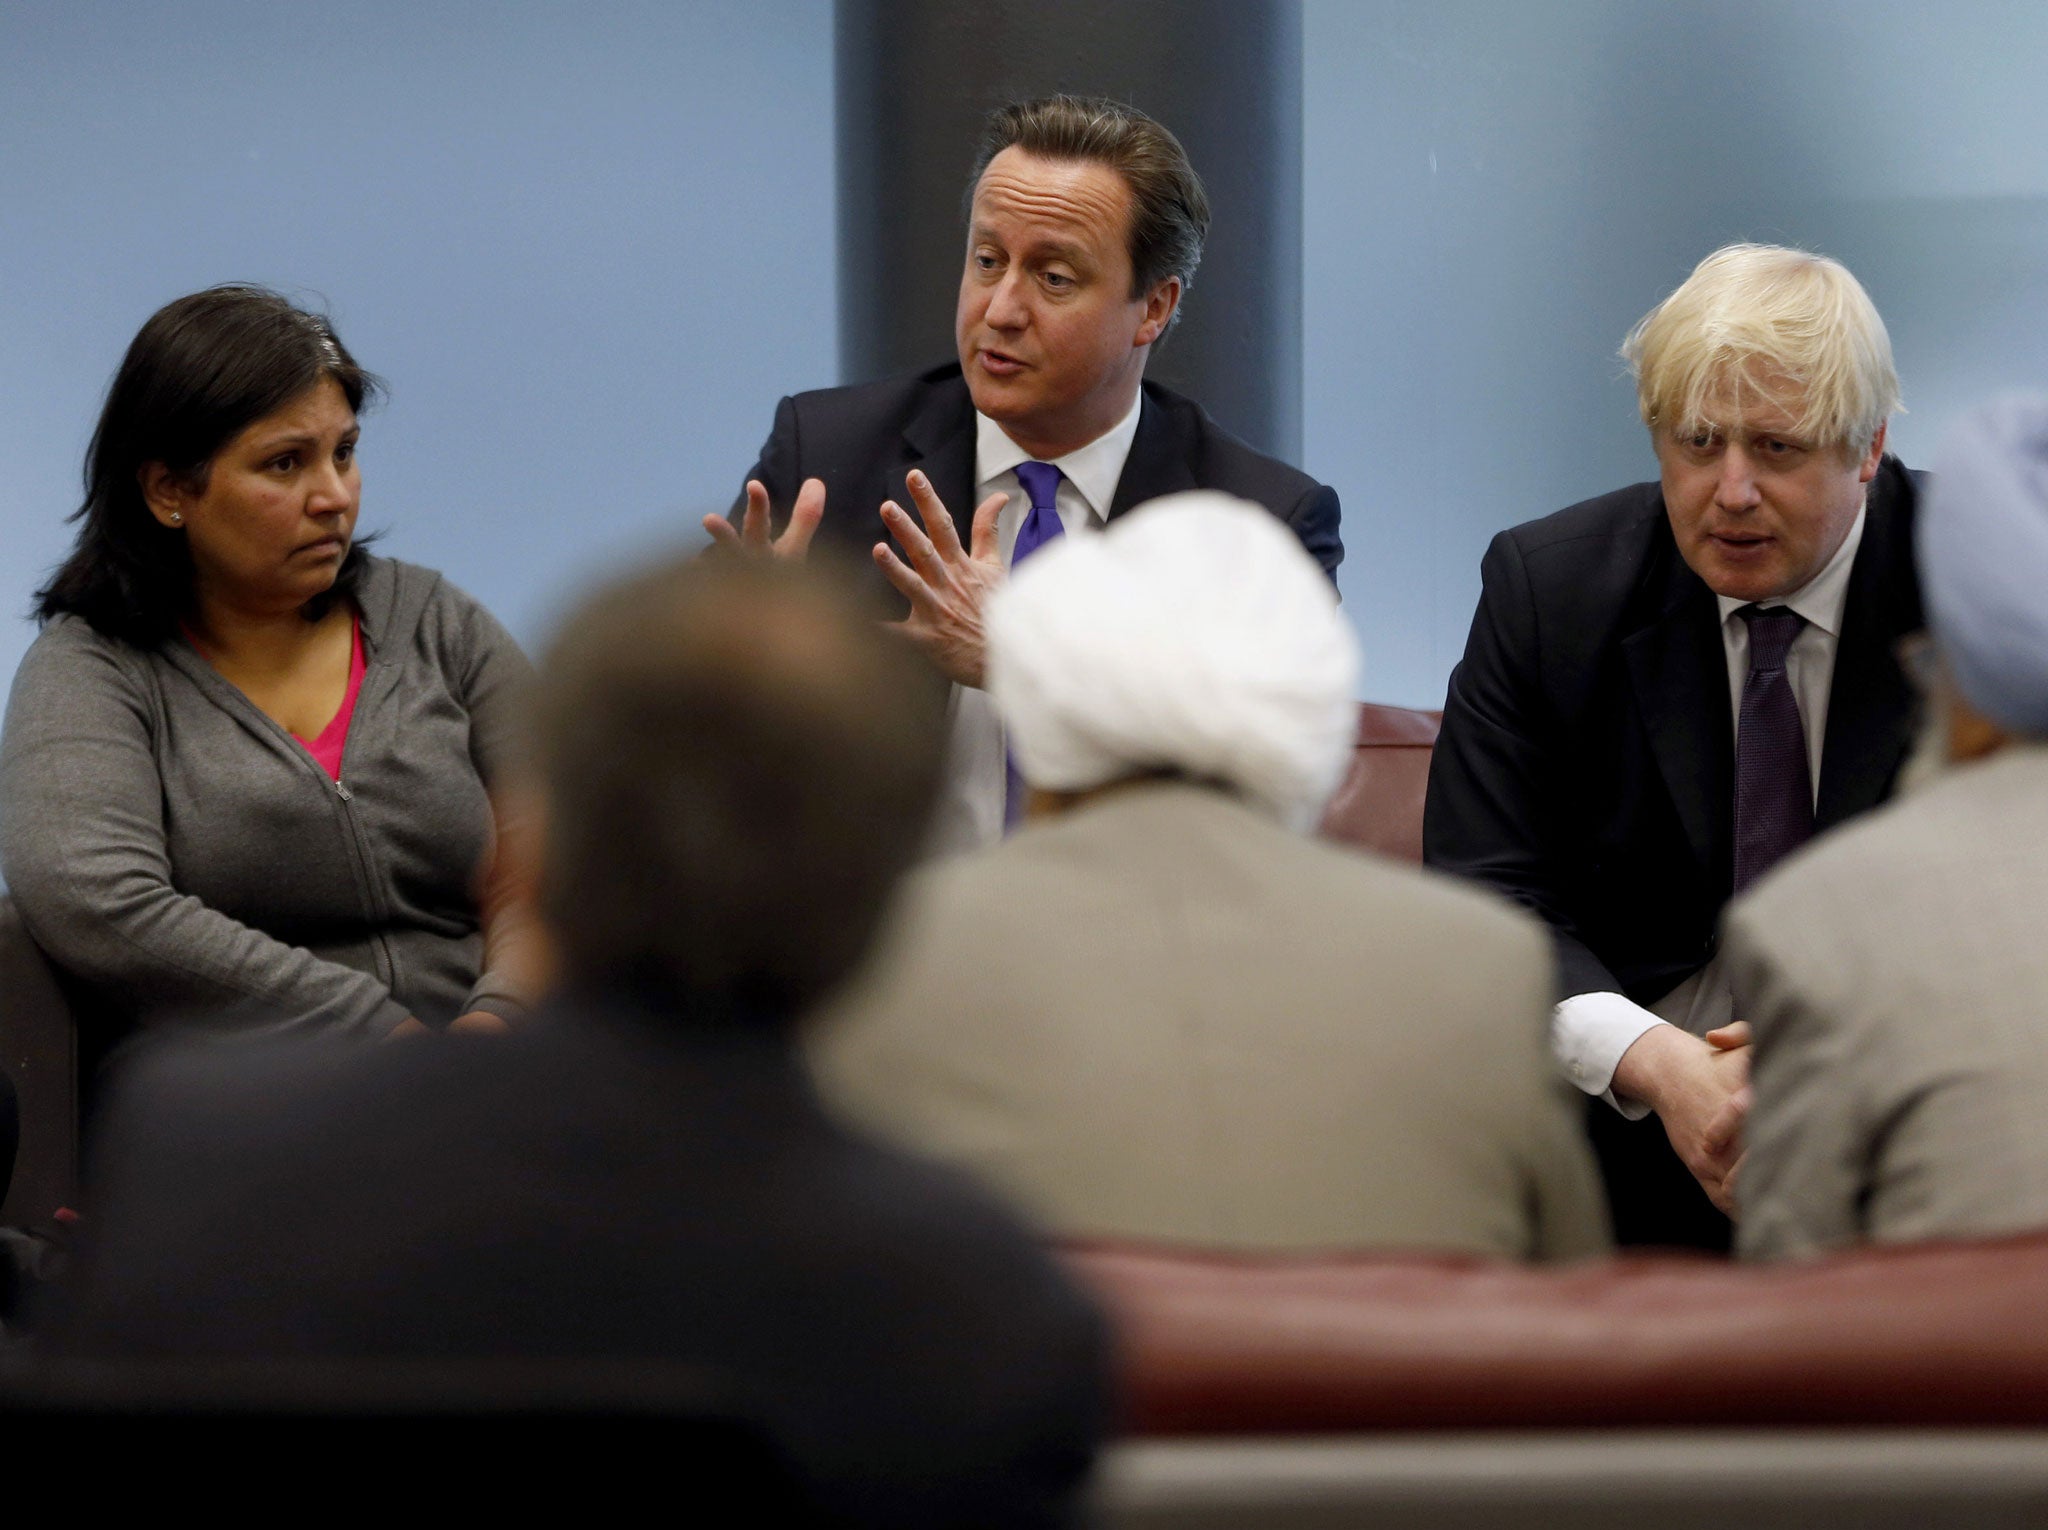 British Prime Minister David Cameron (C) and London Mayor Boris Johnson (R) meet with members of the local community during a visit to Woolwich, southeast London on May 23, 2013. Prime Minister David Cameron vowed that Britain would be resolute against violent extremism following the gruesome murder of a soldier by two suspected Islamists on a London street. After chairing a meeting of security chiefs the day after the soldier was hacked to death in broad daylight, he said Britain's communities would unite in condemning an attack he described as a 'betrayal of Islam'.